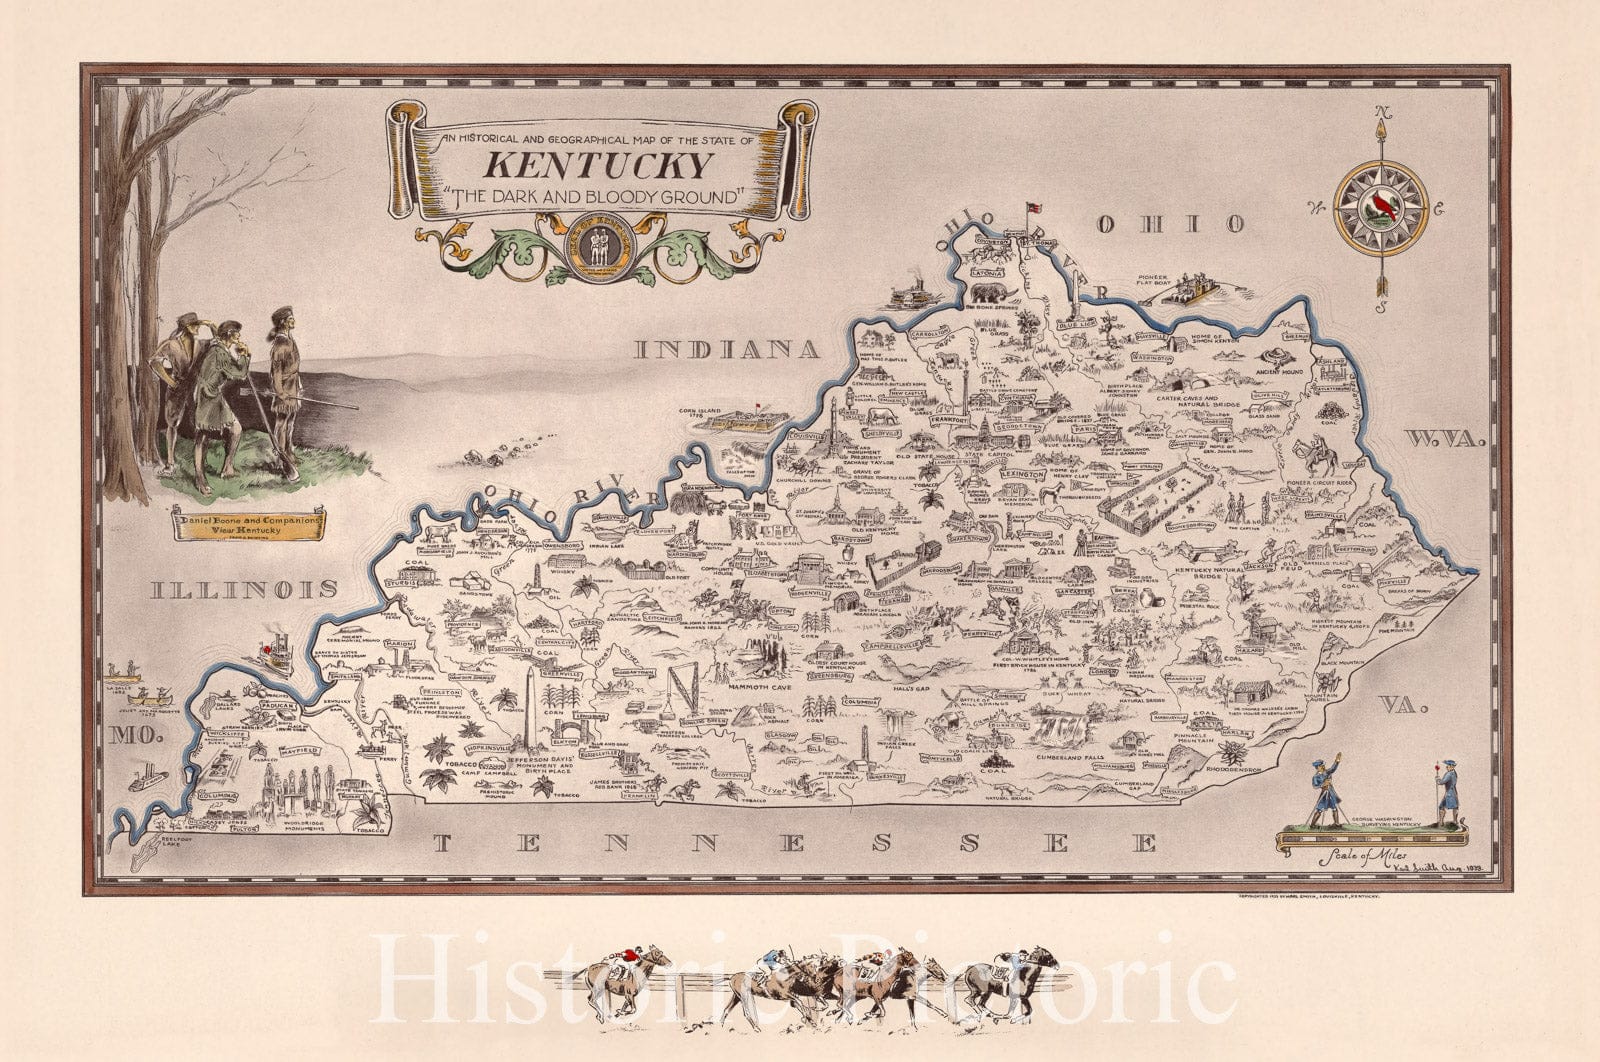 Historic Map : An historical and geographical map of the state of Kentucky, 1939 - Vintage Wall Art